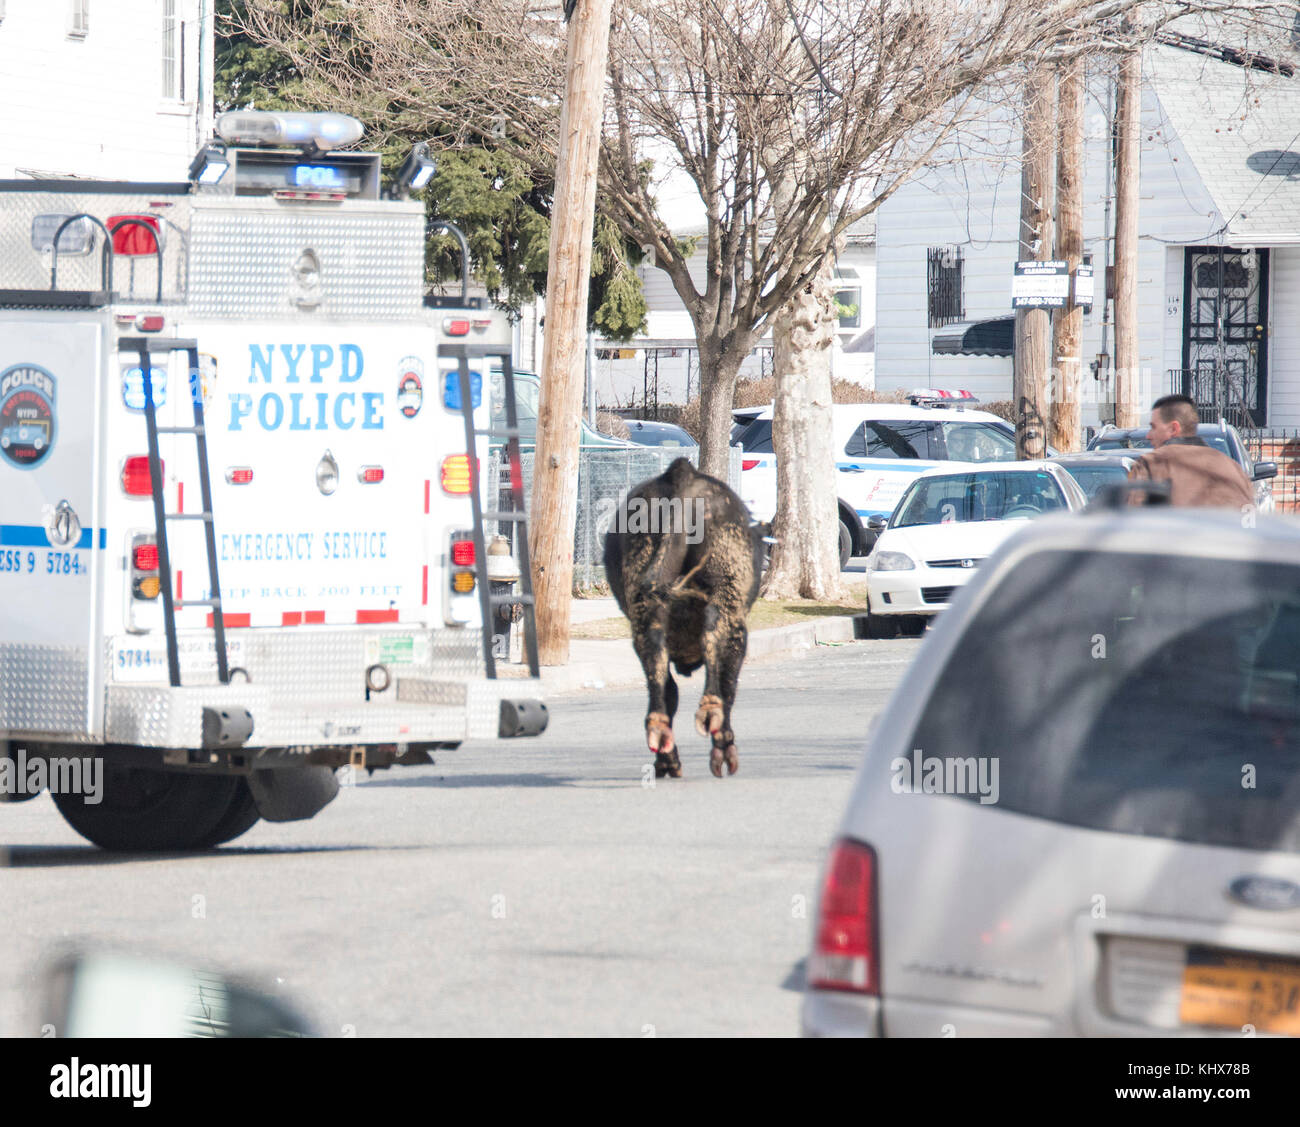 NEW YORK, NY - FEBRUARY 21: NYPD ESU officer prepares a tranquilizer dart for the bull that broke free from a slaughter house near Liberty Ave. and 150th St. the bull took hours and miles to catch along with lots of darts on February 21. 2017 in New York City   People:  Bull Stock Photo